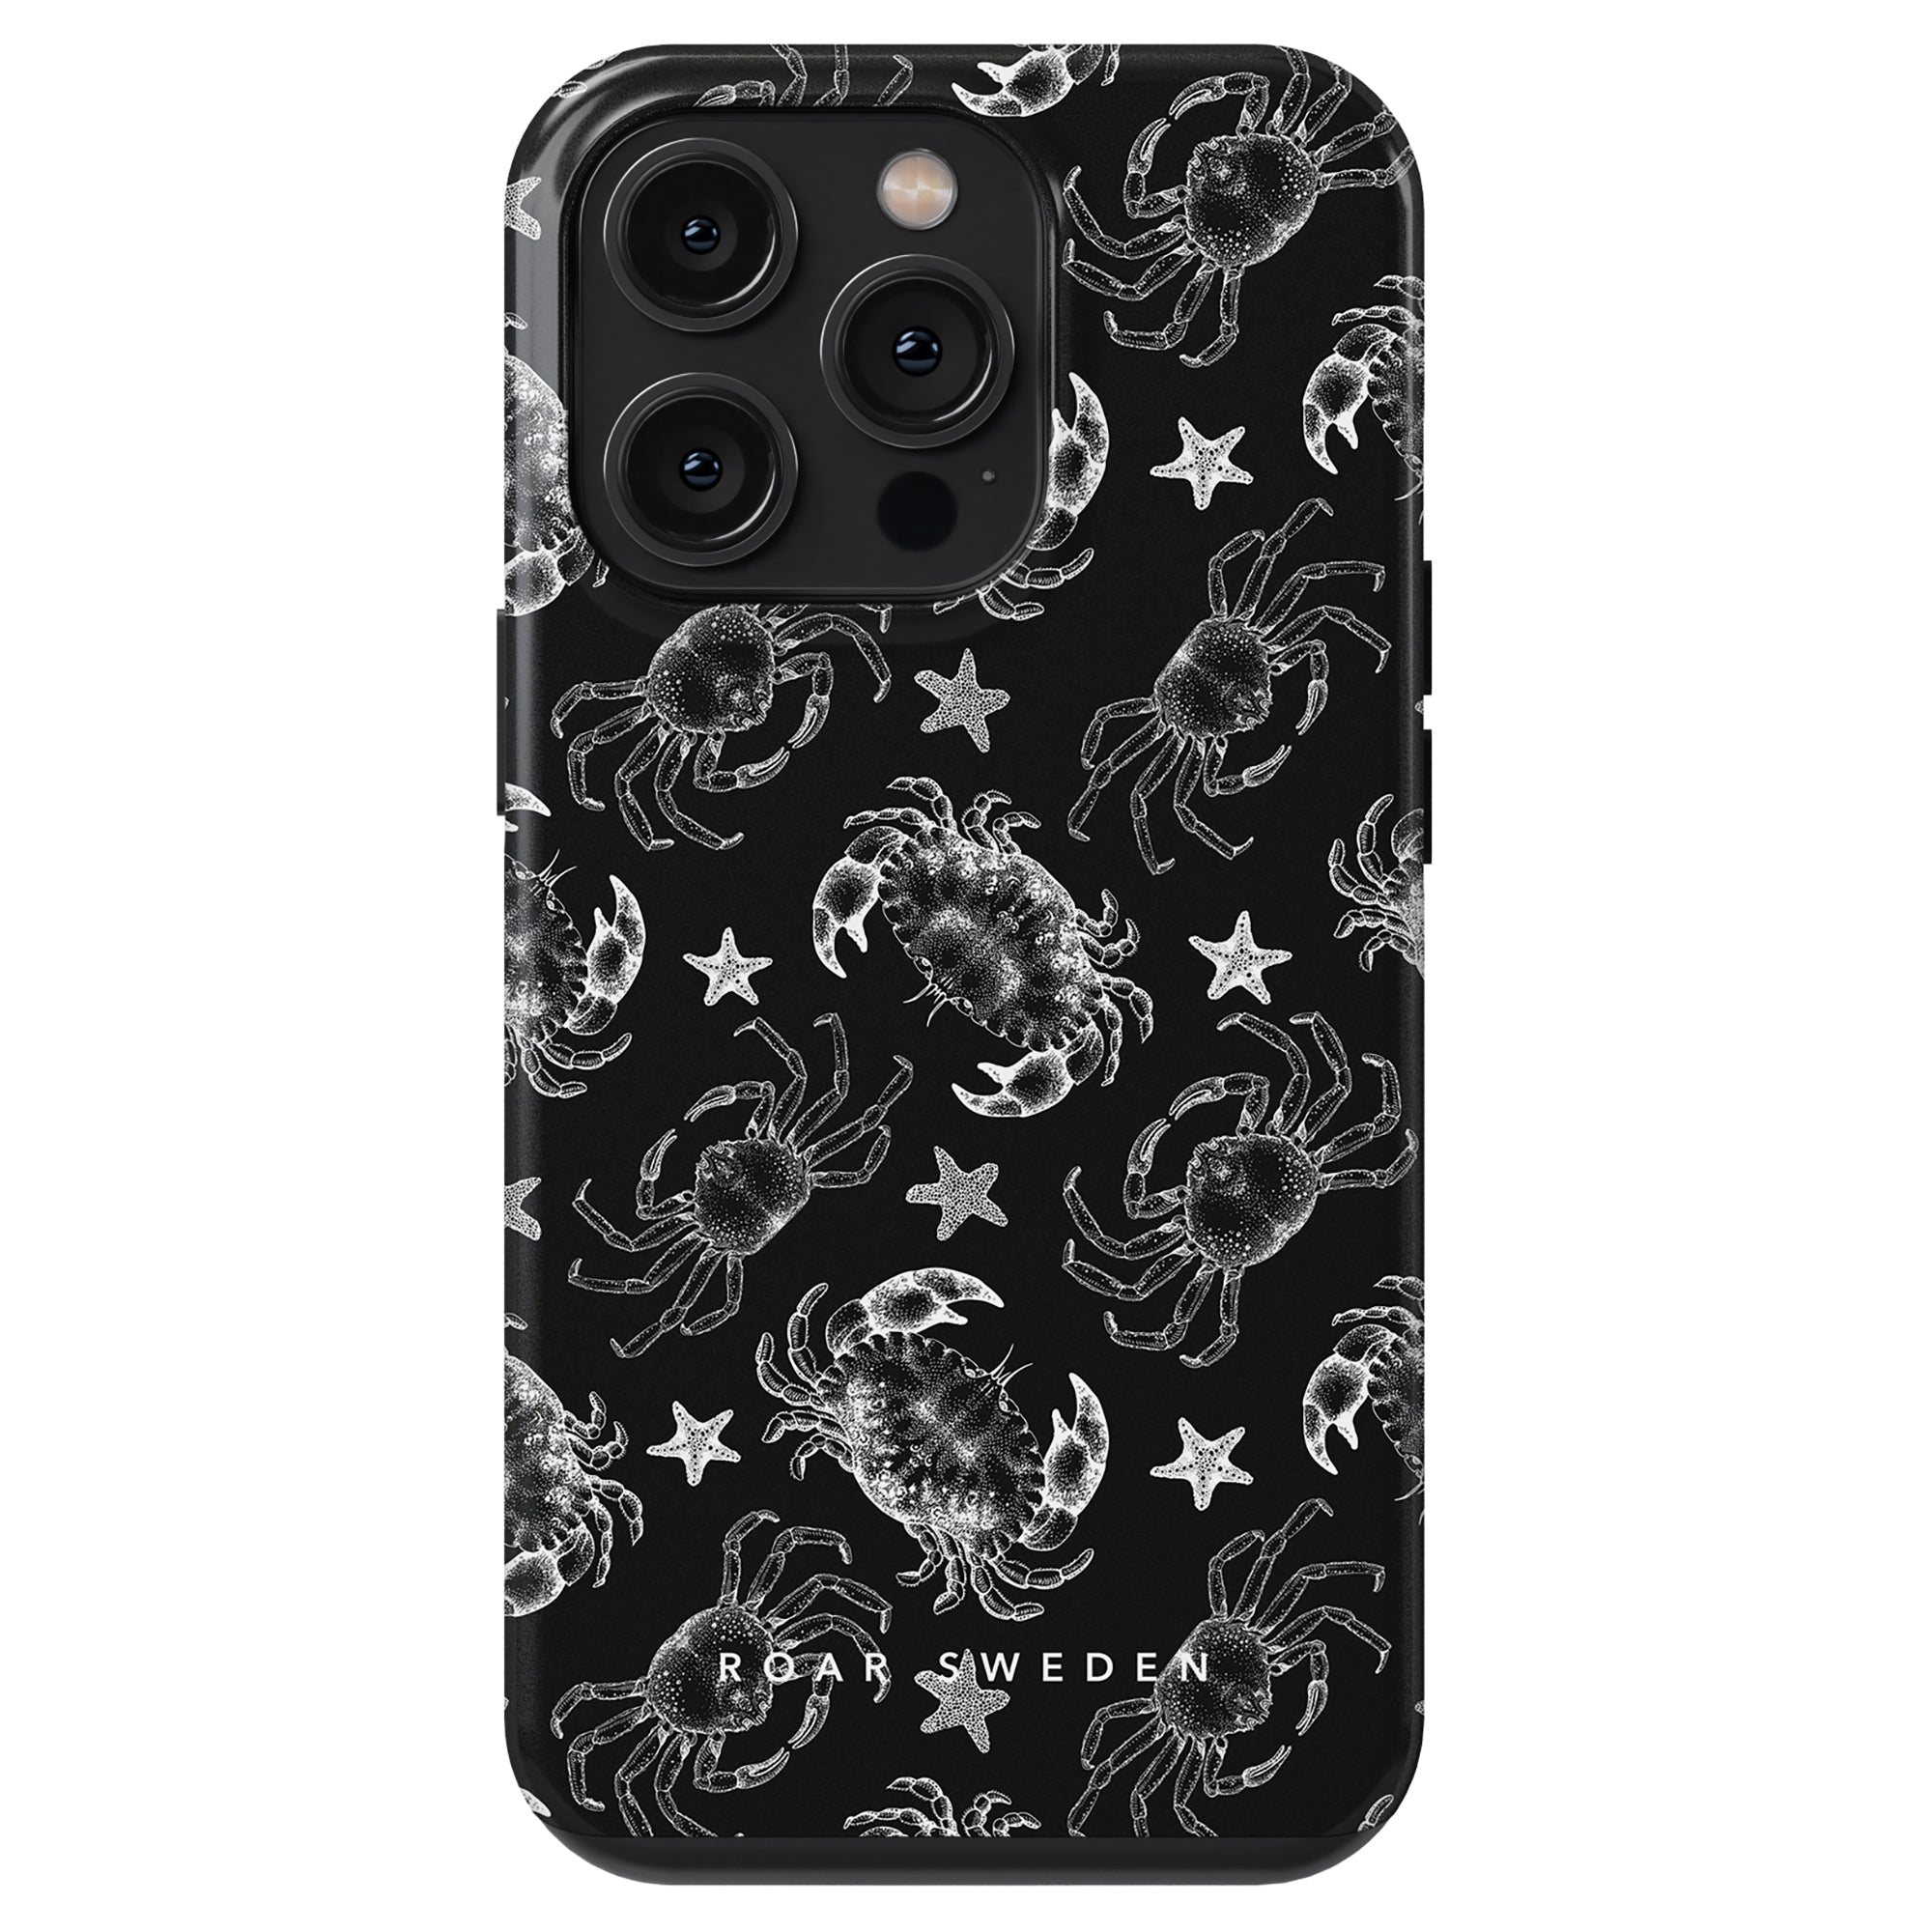 A black phone case with white illustrations of crabs, starfish, and lobsters from the Ocean Collection. The brand name "Roar Sweden" is printed at the bottom. This Black Crab - Tough Case offers both style and protection as a robust mobilskal.